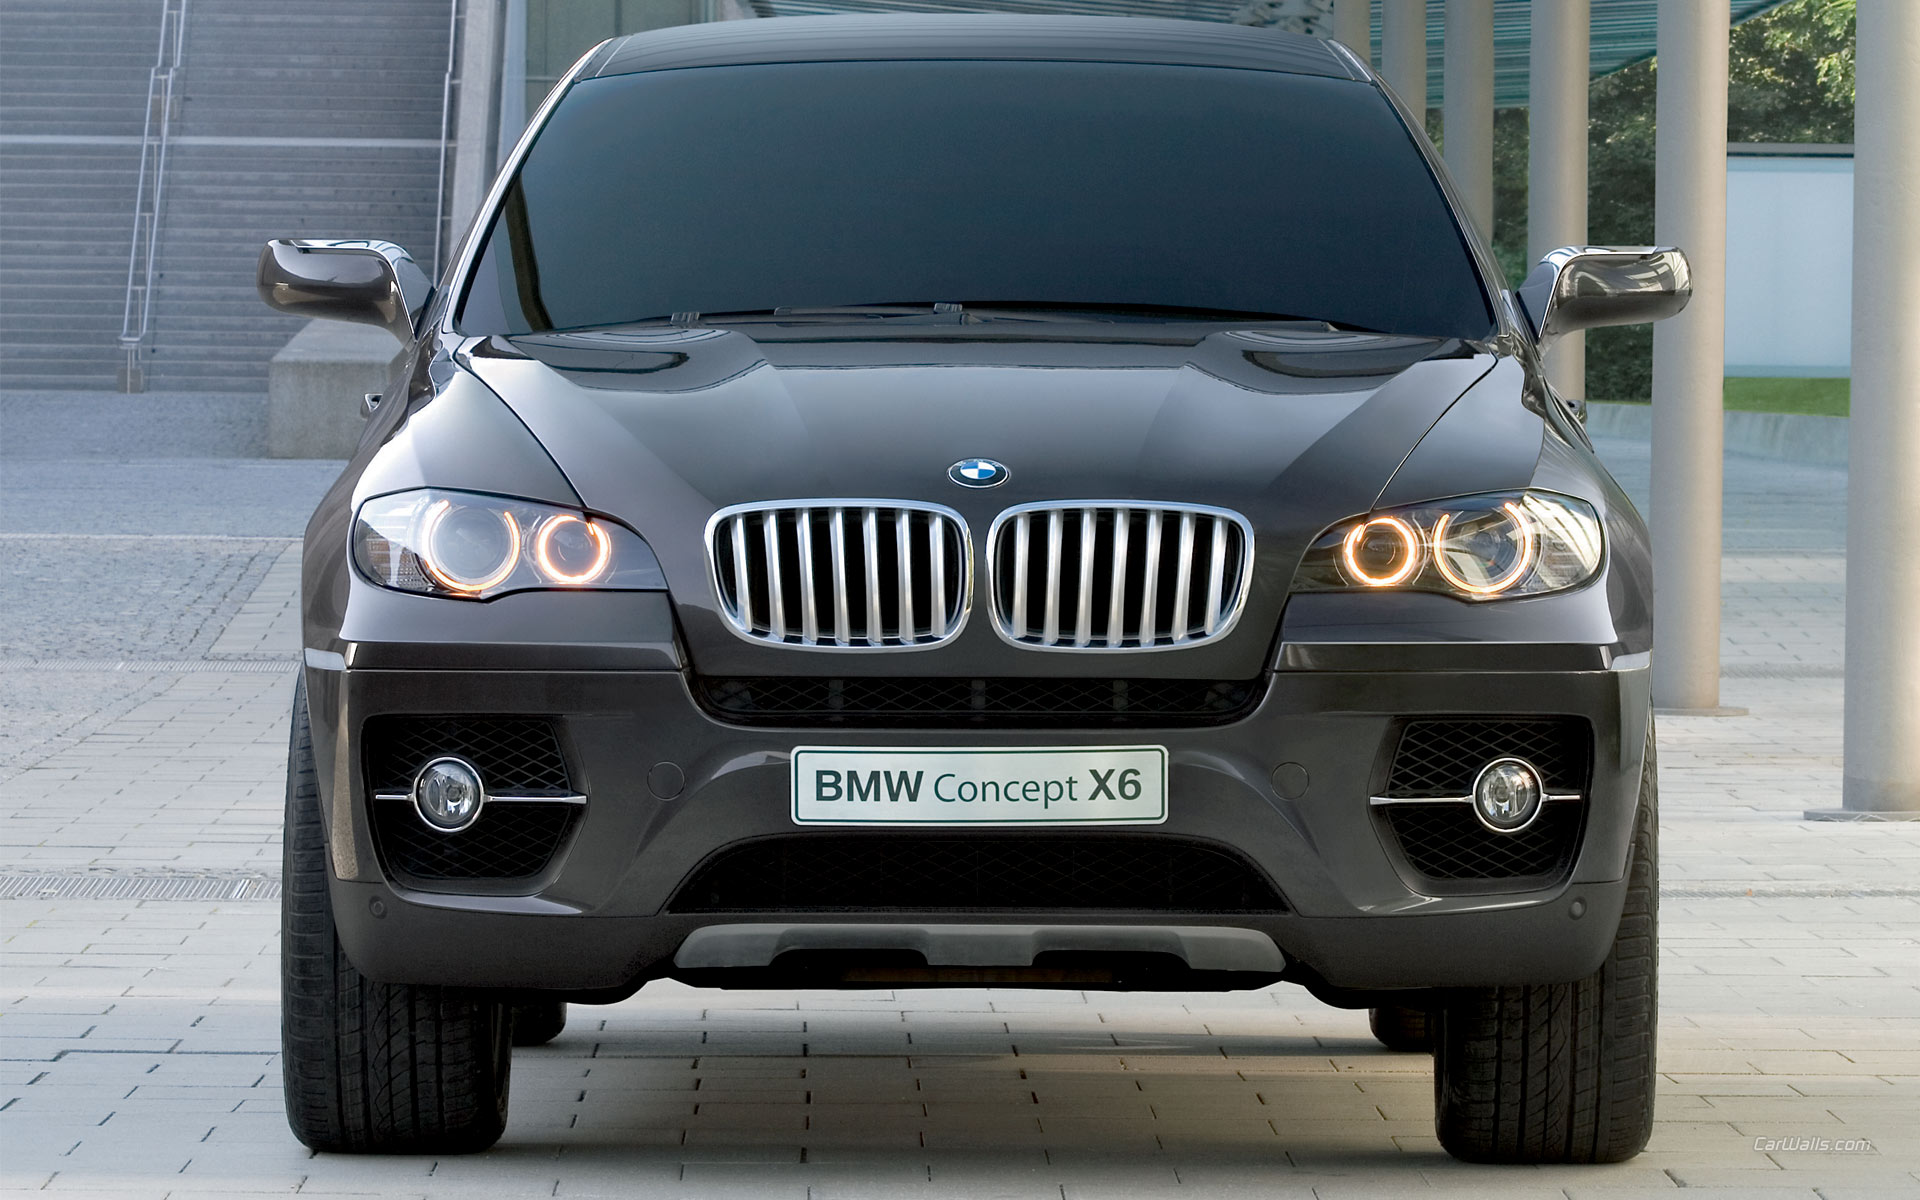 Download full size X6 Concept black front Bmw wallpaper / 1920x1200